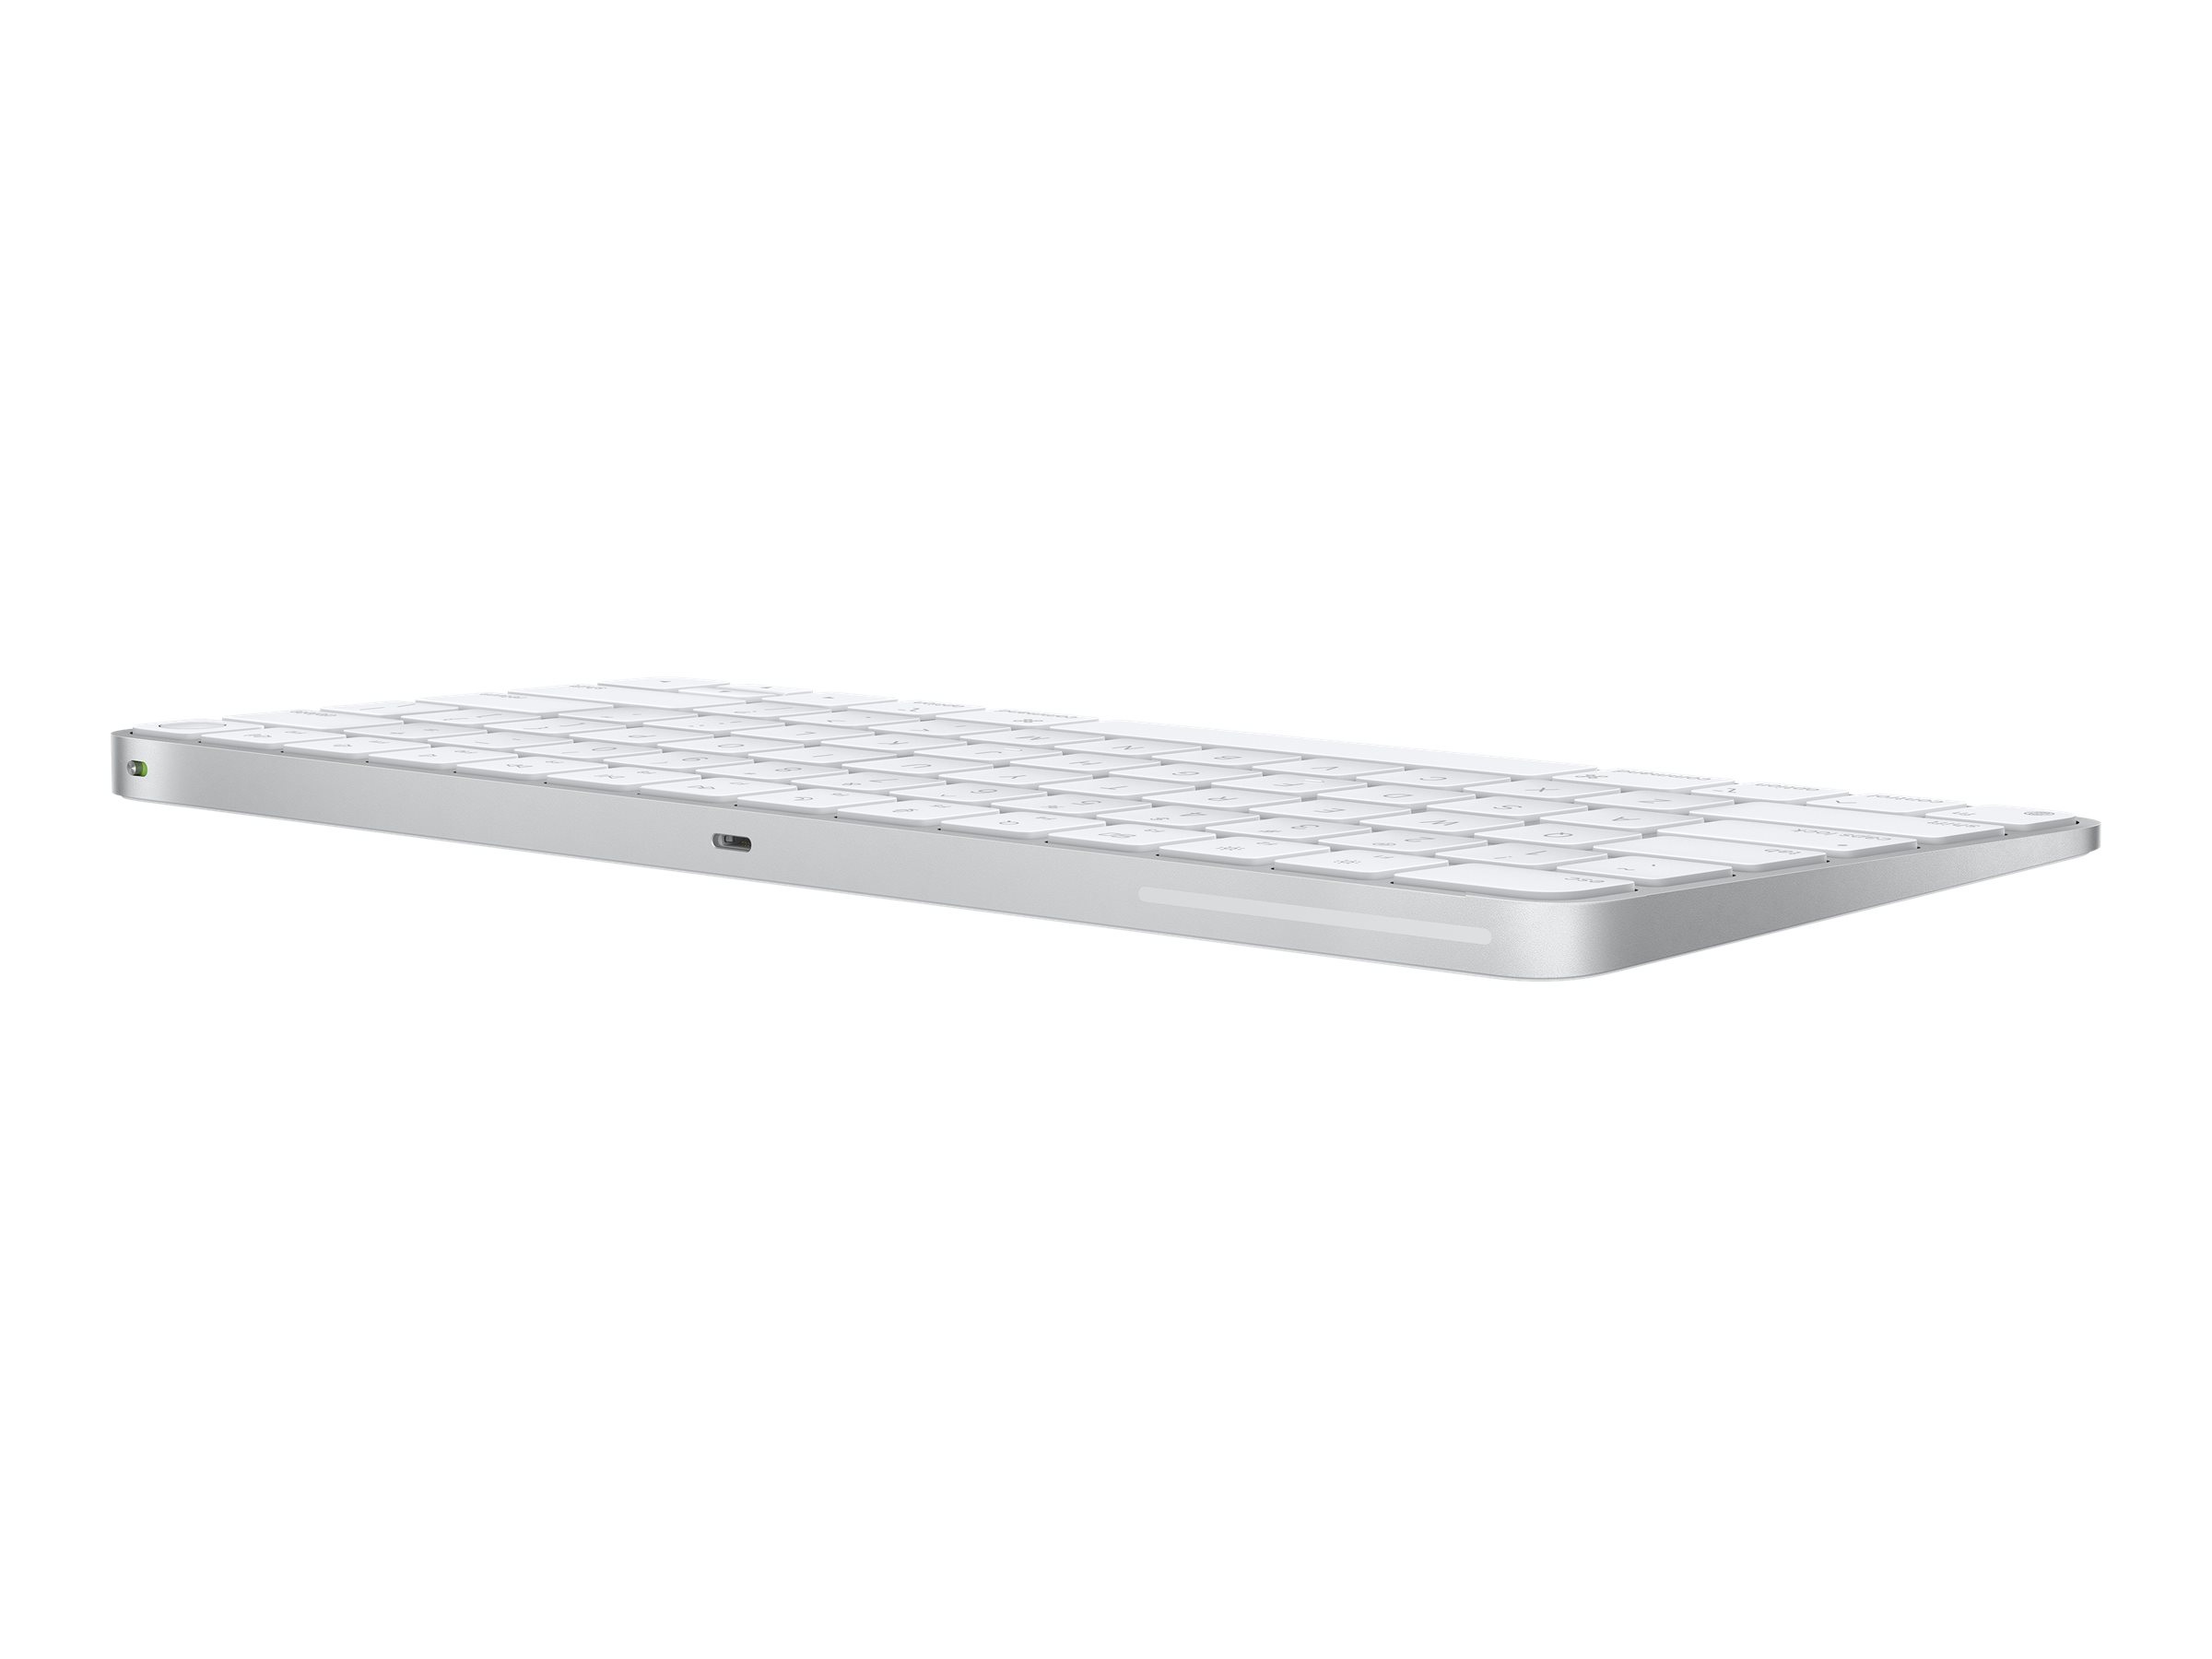 Apple Magic Keyboard with Touch ID - Clavier - Bluetooth, USB-C - QWERTY - Anglais international - MK293Z/A - Claviers